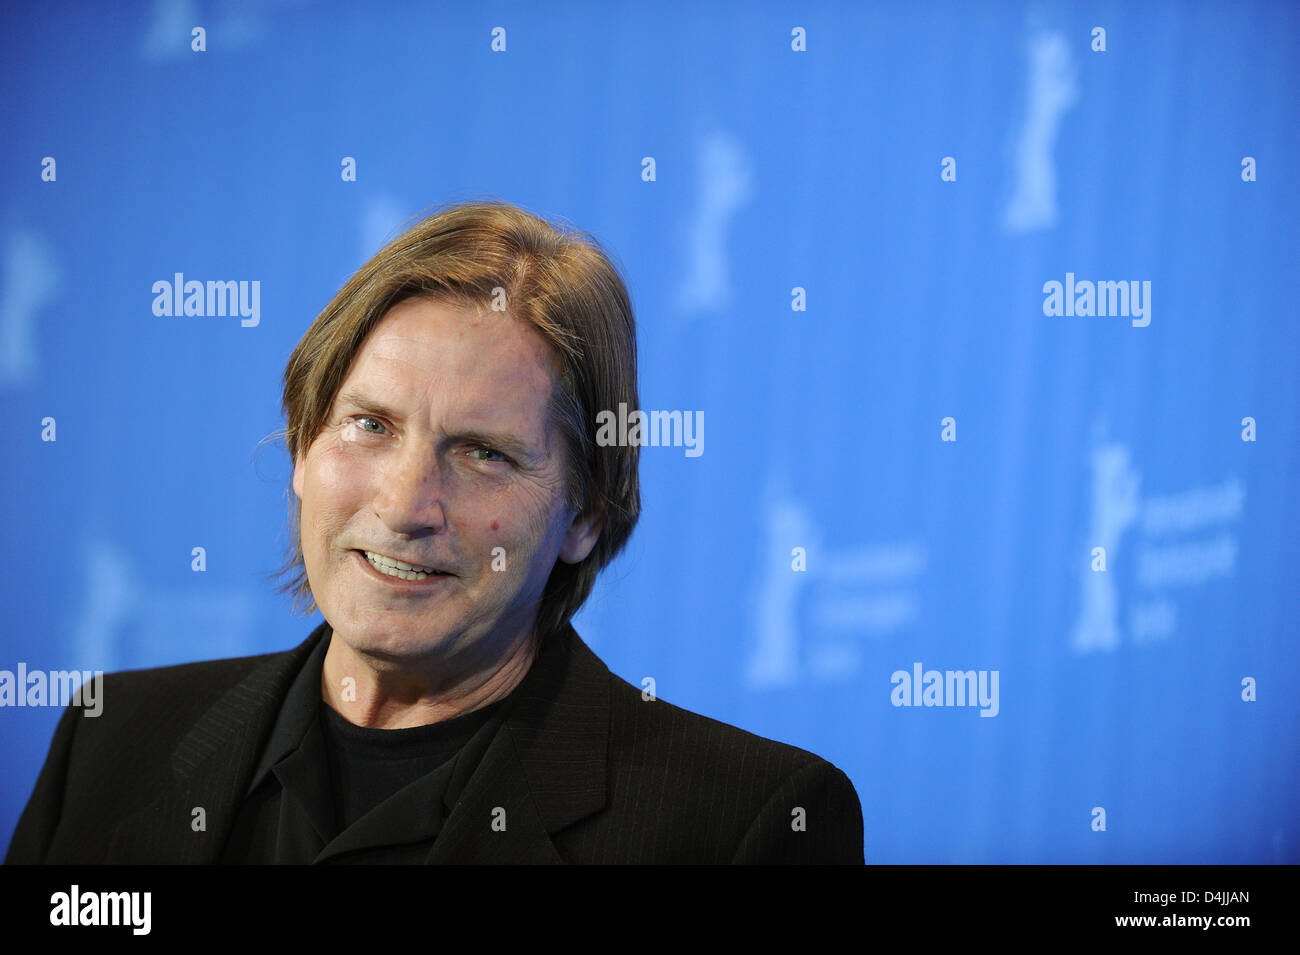 Actor Joe Dallesandro poses during the photo call of the film ?Little Joe? at the 59th Berlin International Film Festival in Berlin, Germany, 12 February 2009. The film runs in the section ?Panorama Documents?. 18 films compete for the Silver and Golden Bear awards at the 59th Berlinale. Photo: Photo: Joerg Carstensen Stock Photo